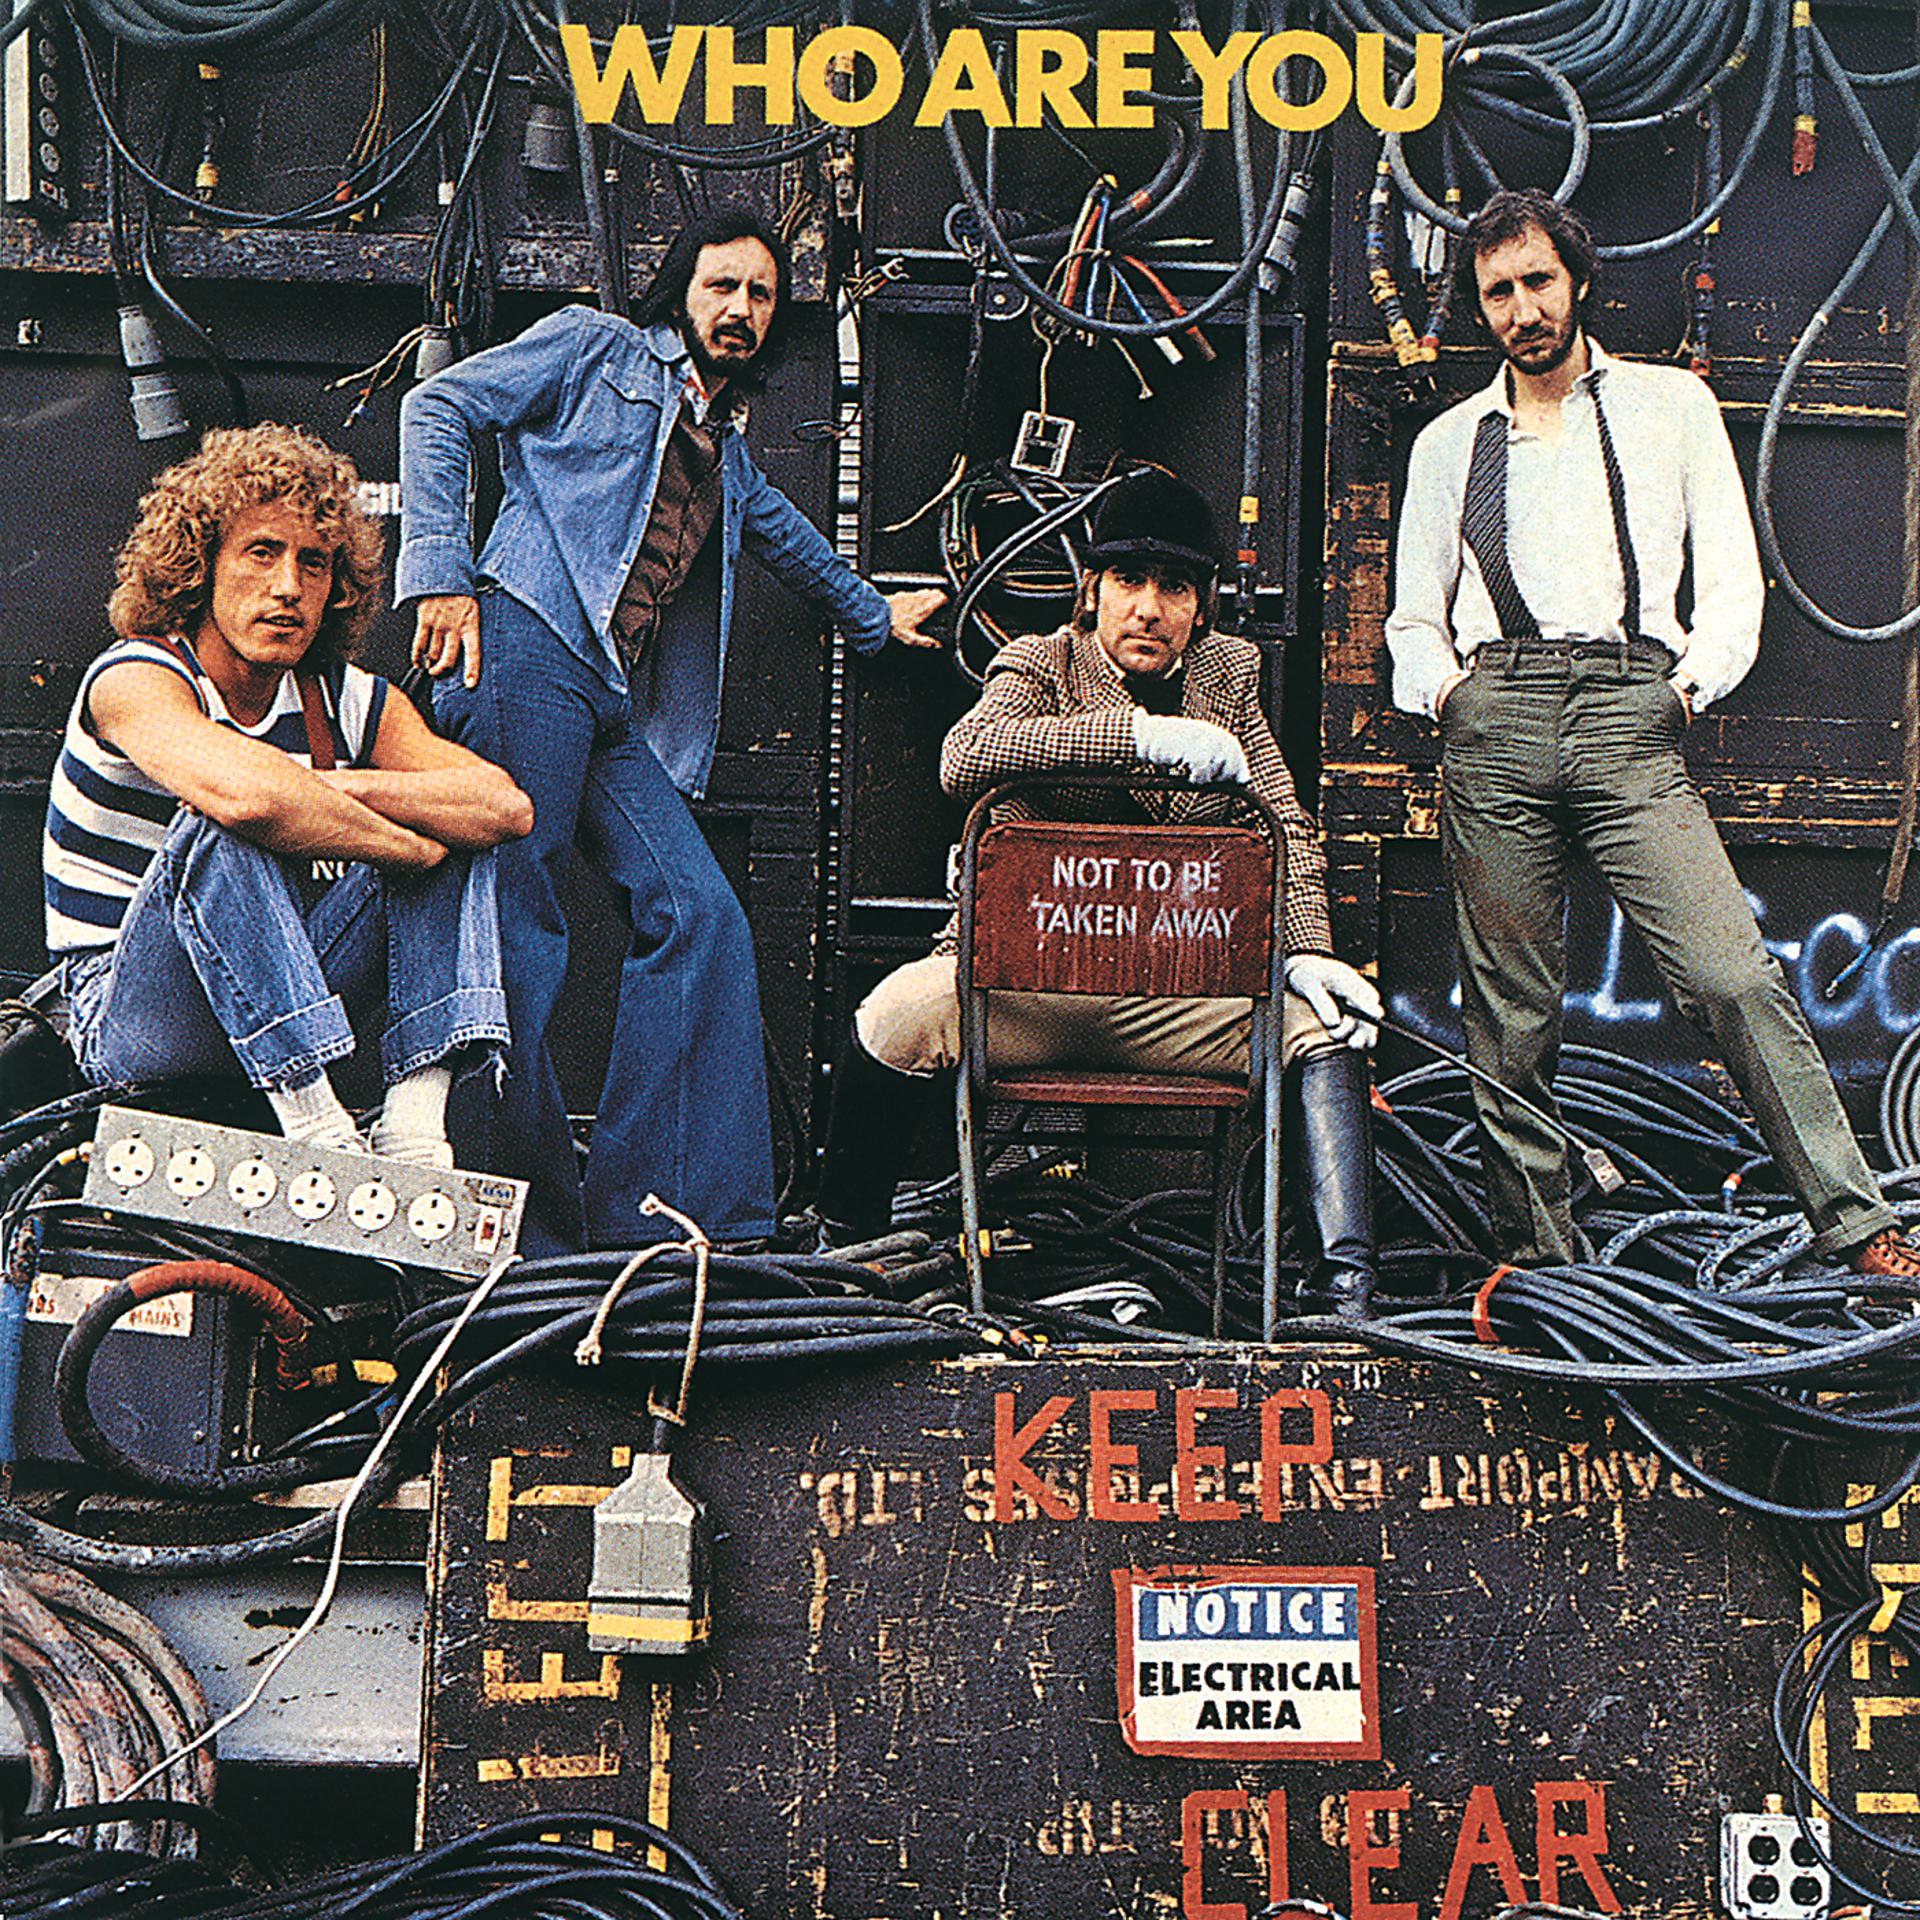 The who who are you 1978. Who are you альбом. The who who are you 1978 CD. Известные обложки альбомов.